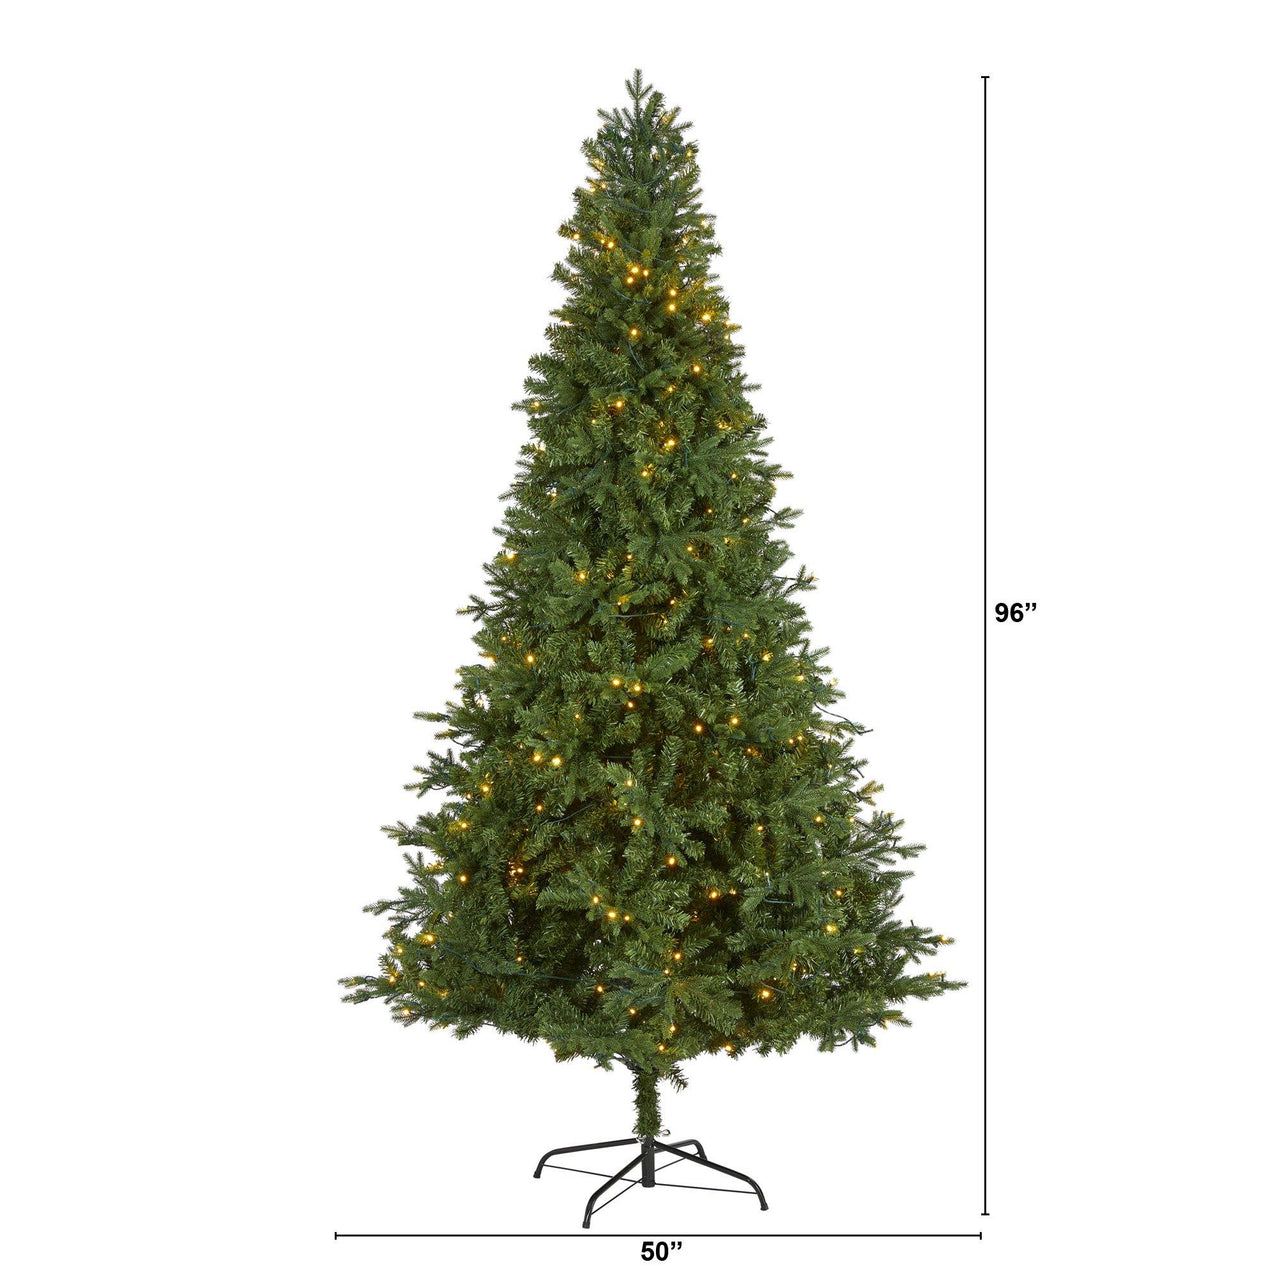 8' Vermont Fir Artificial Christmas Tree with 450 Clear LED Lights - The Fox Decor